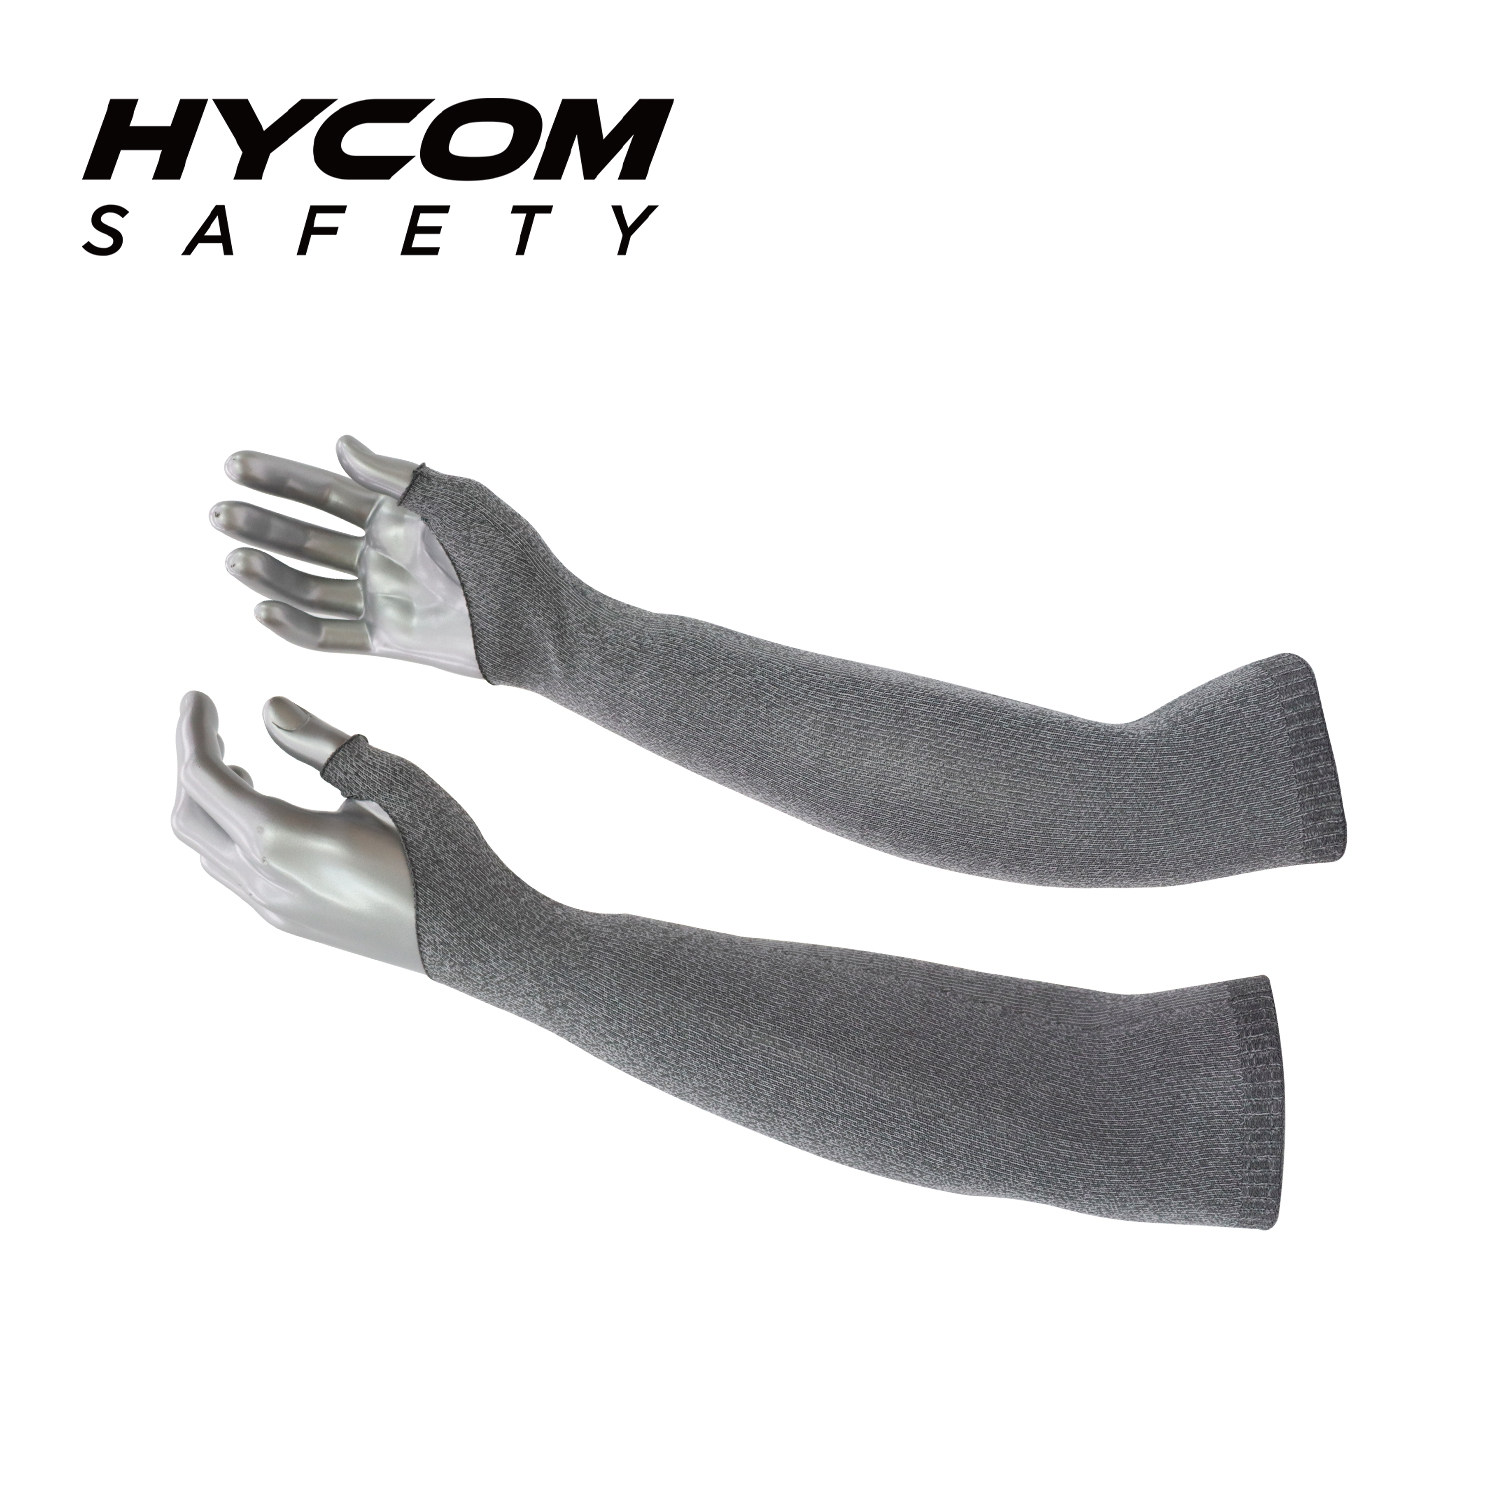 HYCOM Cut Level 3 Three-Dimensionally Seamless Knitted Cut Resistant Arm Cover Sleeve For Work Safety